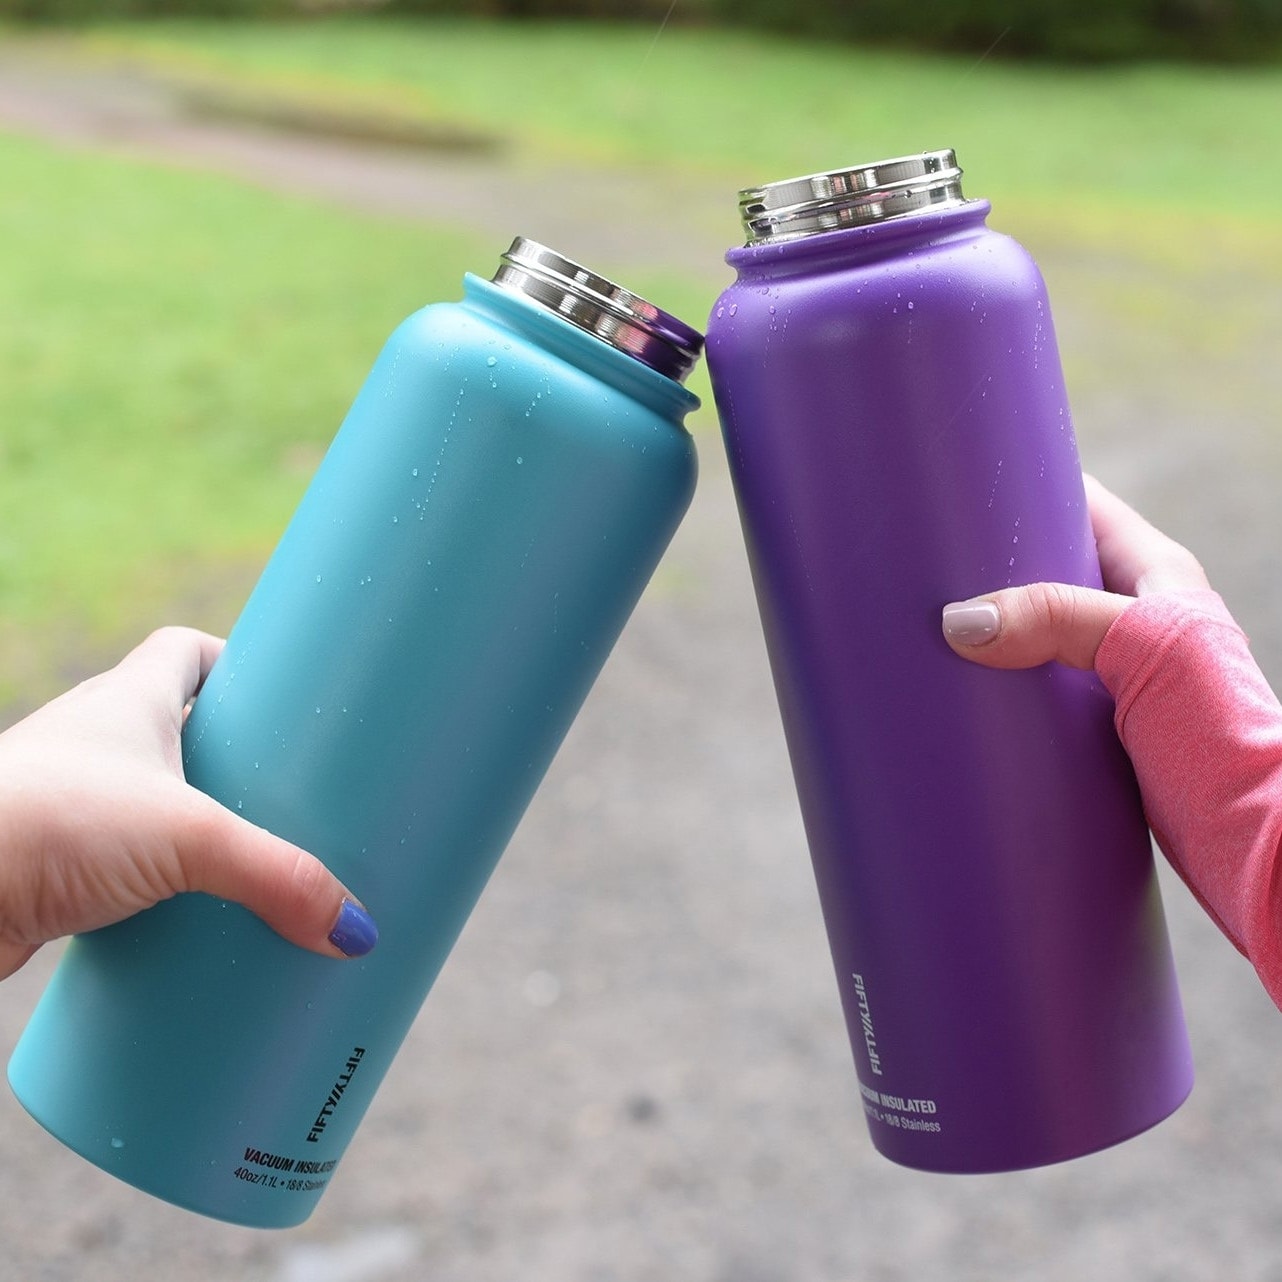 https://ak1.ostkcdn.com/images/products/21866414/40-oz.-Vacuum-Insulated-Bottle-with-Wide-Mouth-3-Finger-Handle-Lid-in-Winter-White-e5a911ef-f527-40d9-8174-43082474ff17.jpg